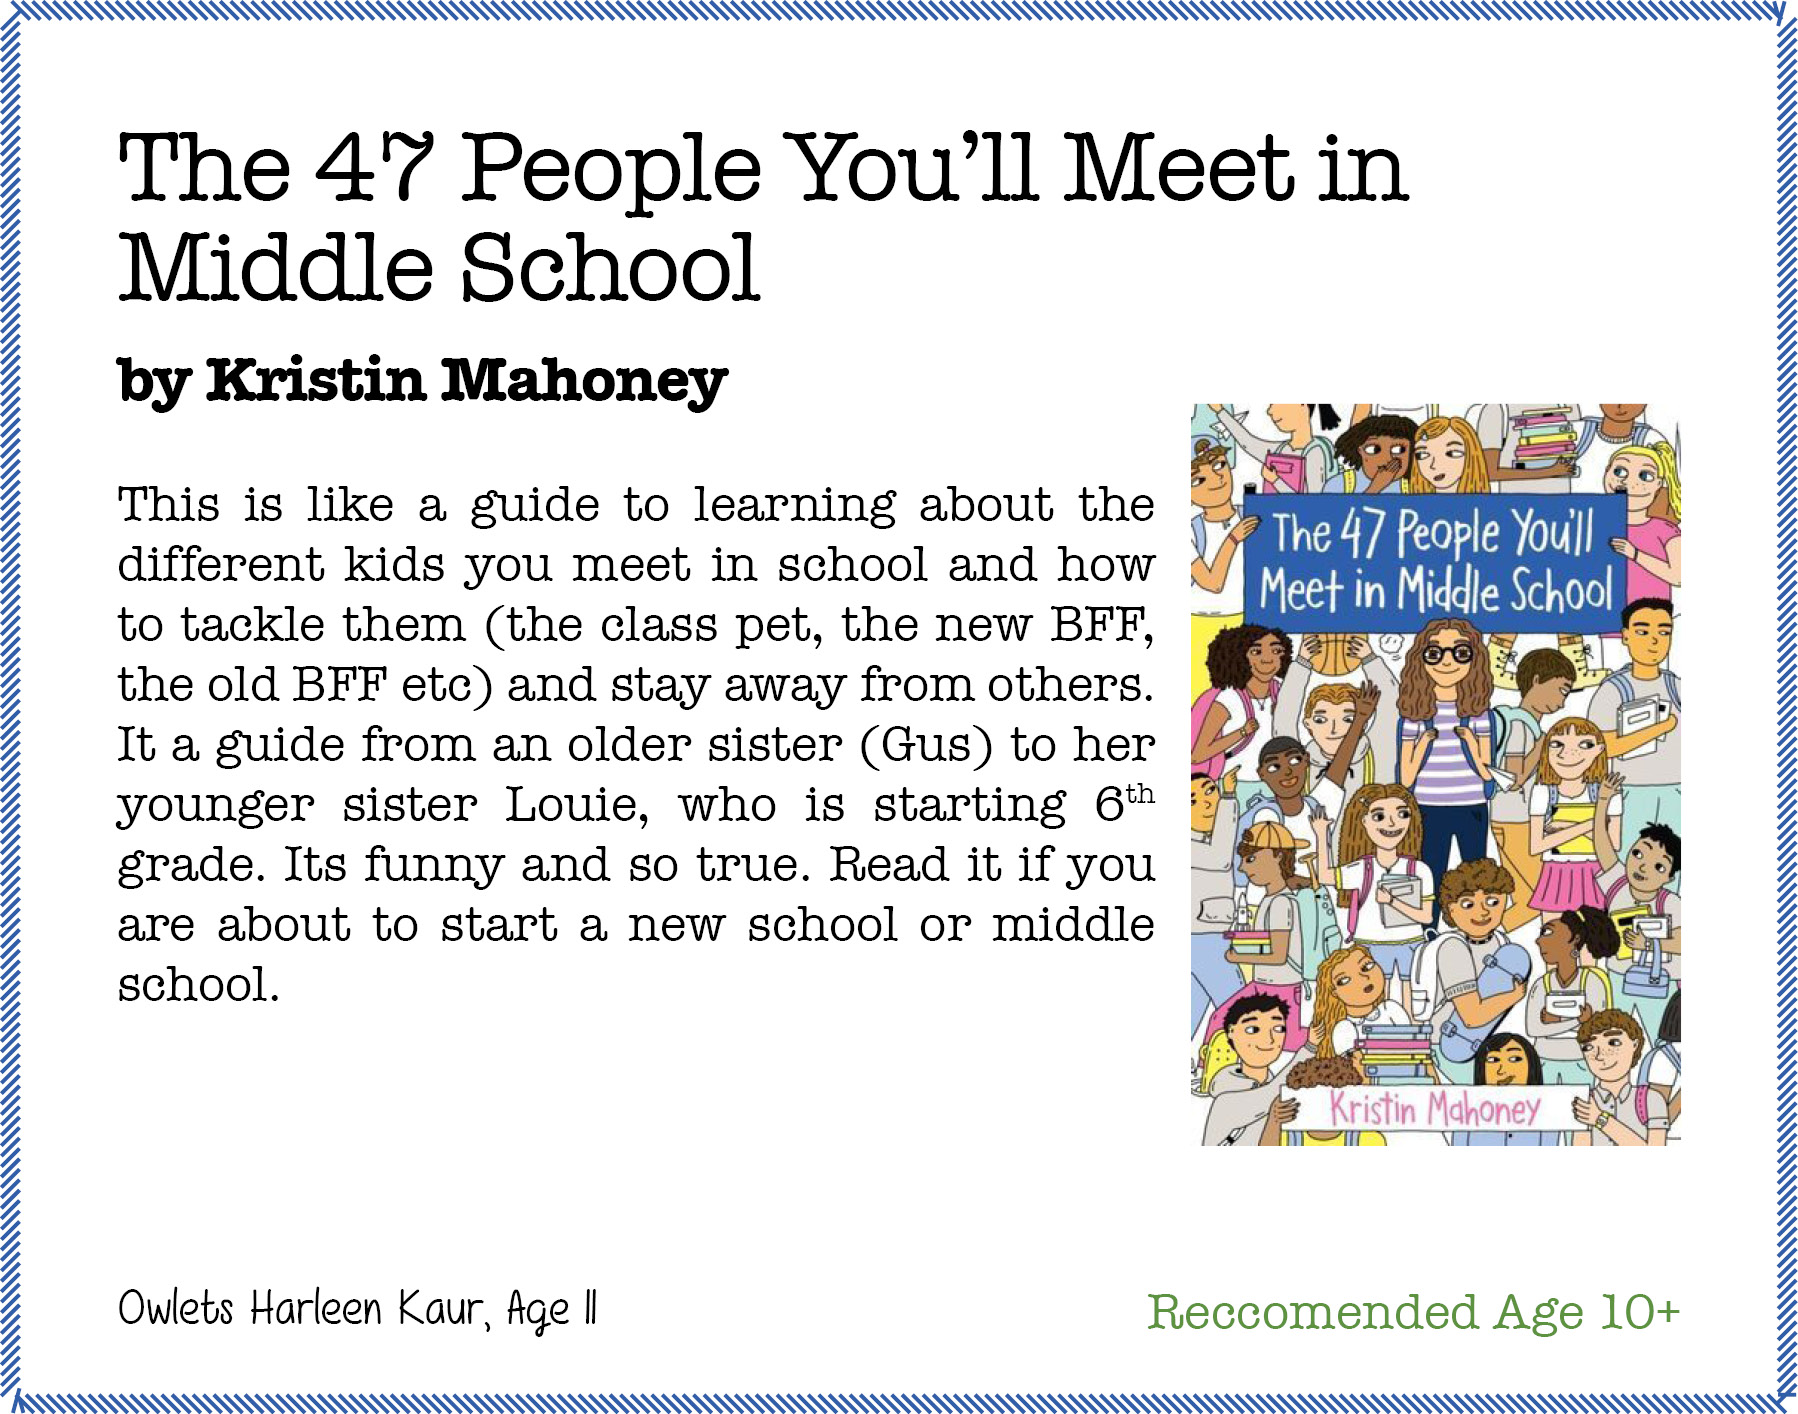 The 47 People You’ll Meet in Middle School